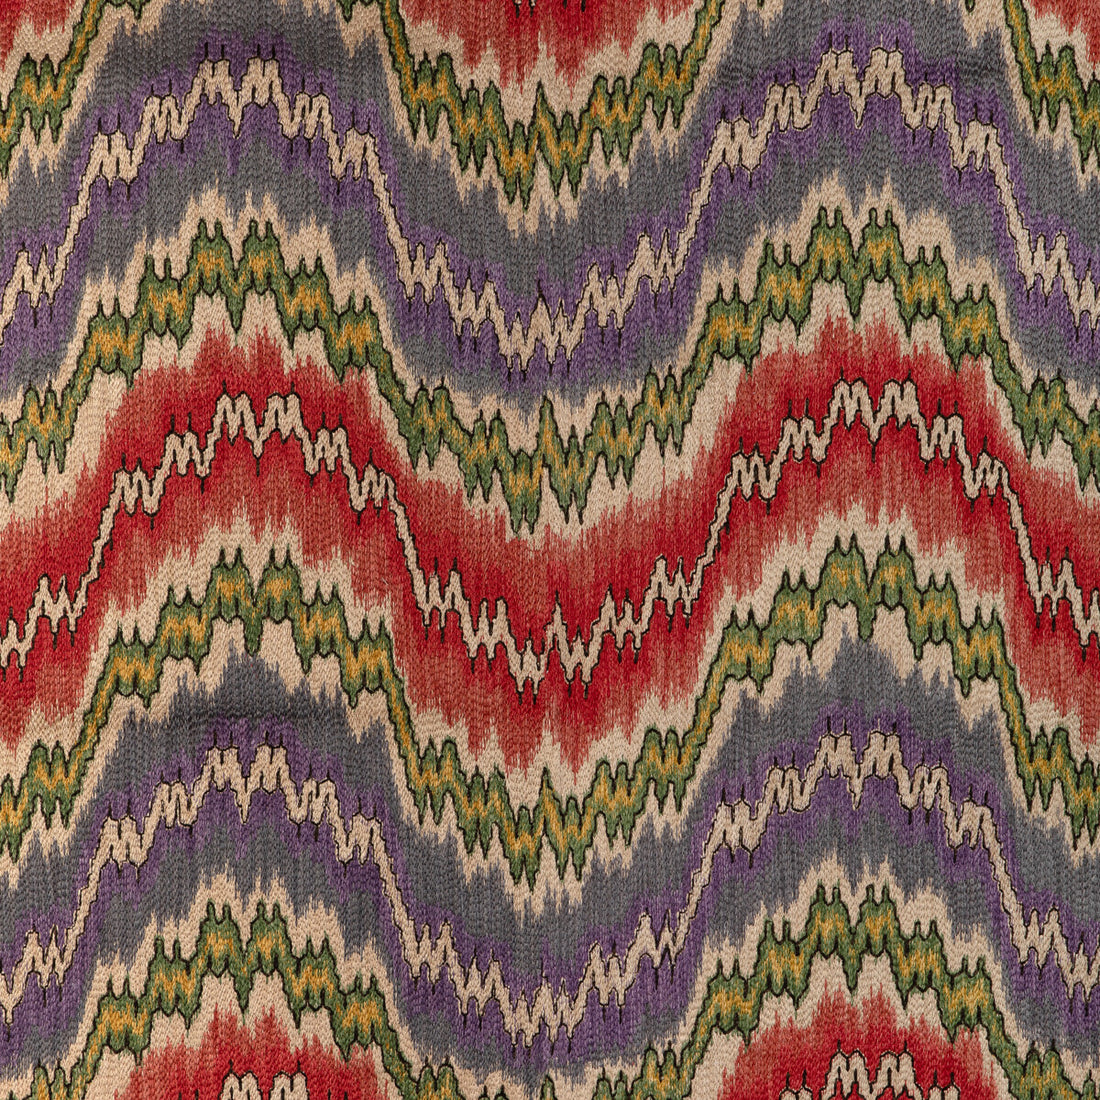 Flame Embroidery fabric in multi color - pattern 2023131.319.0 - by Lee Jofa in the Lee Jofa 200 collection